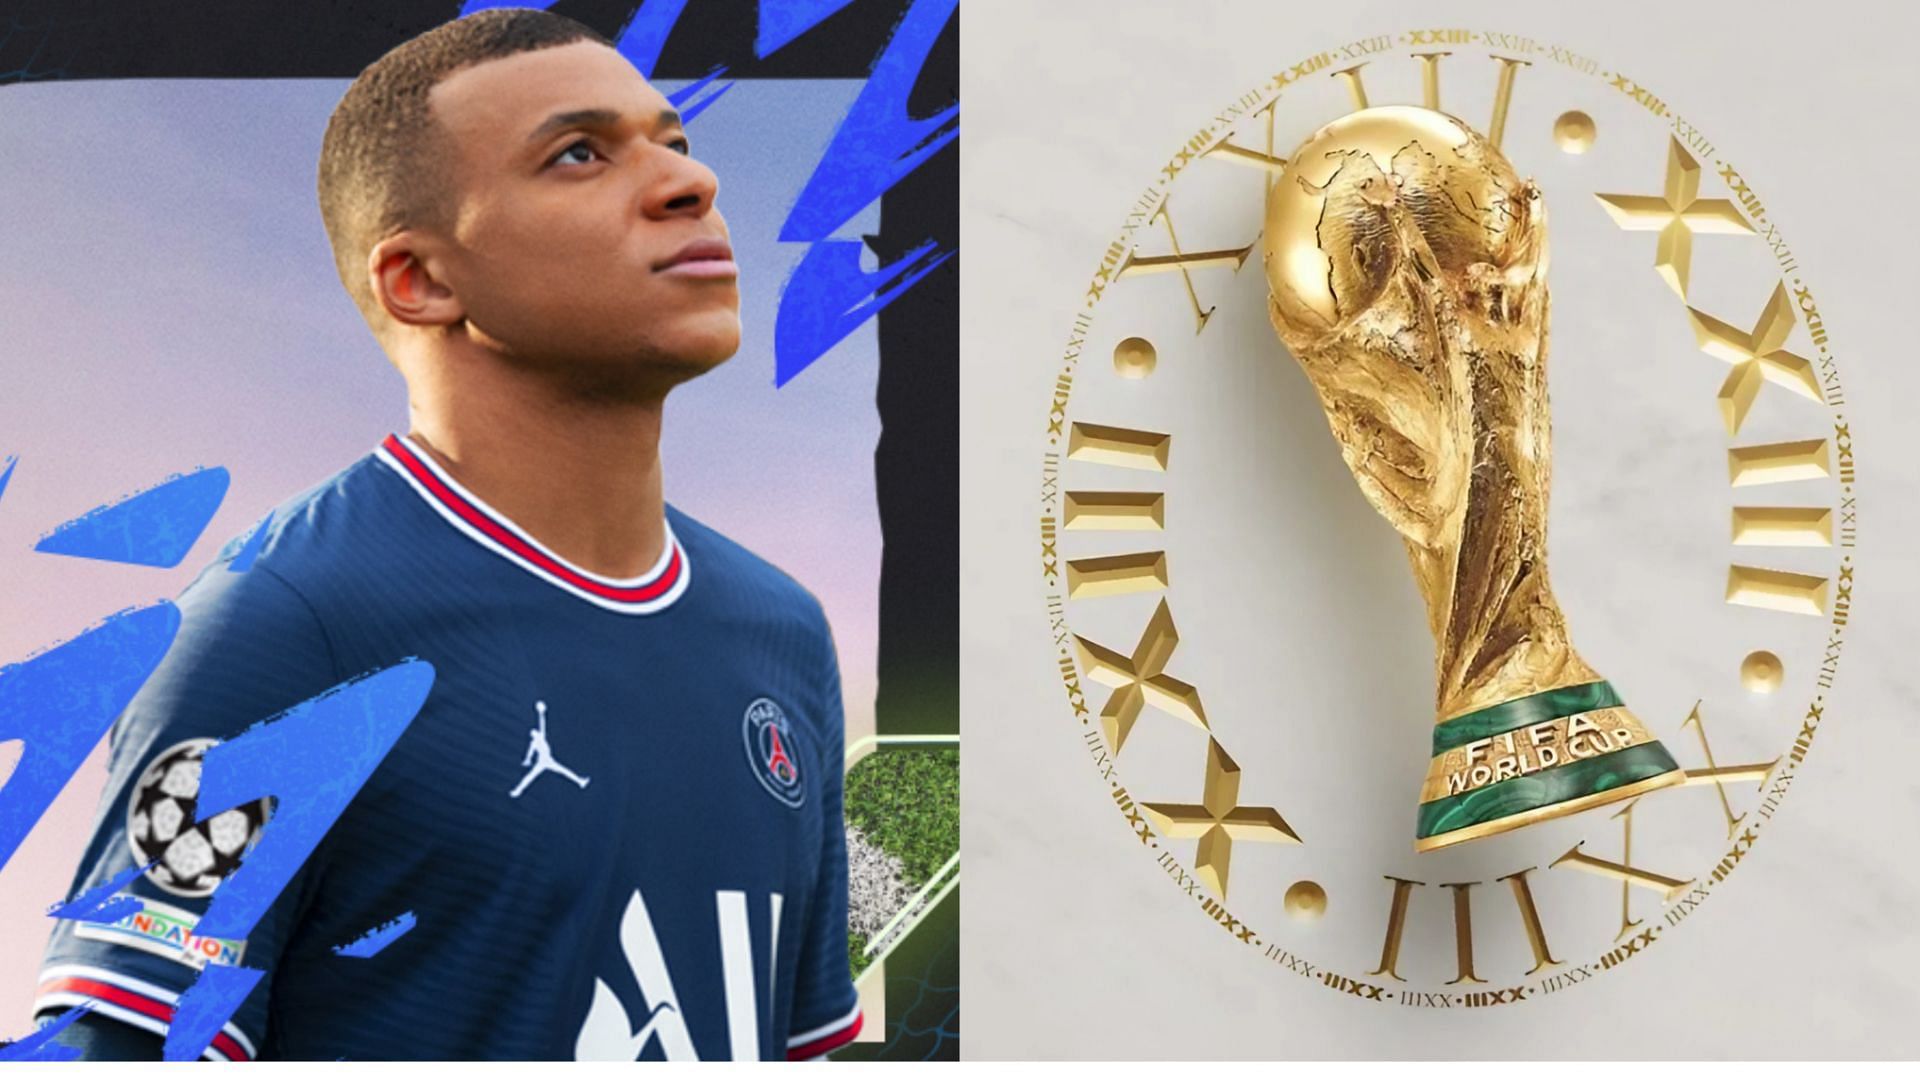 fifa world cup 2022 mobile